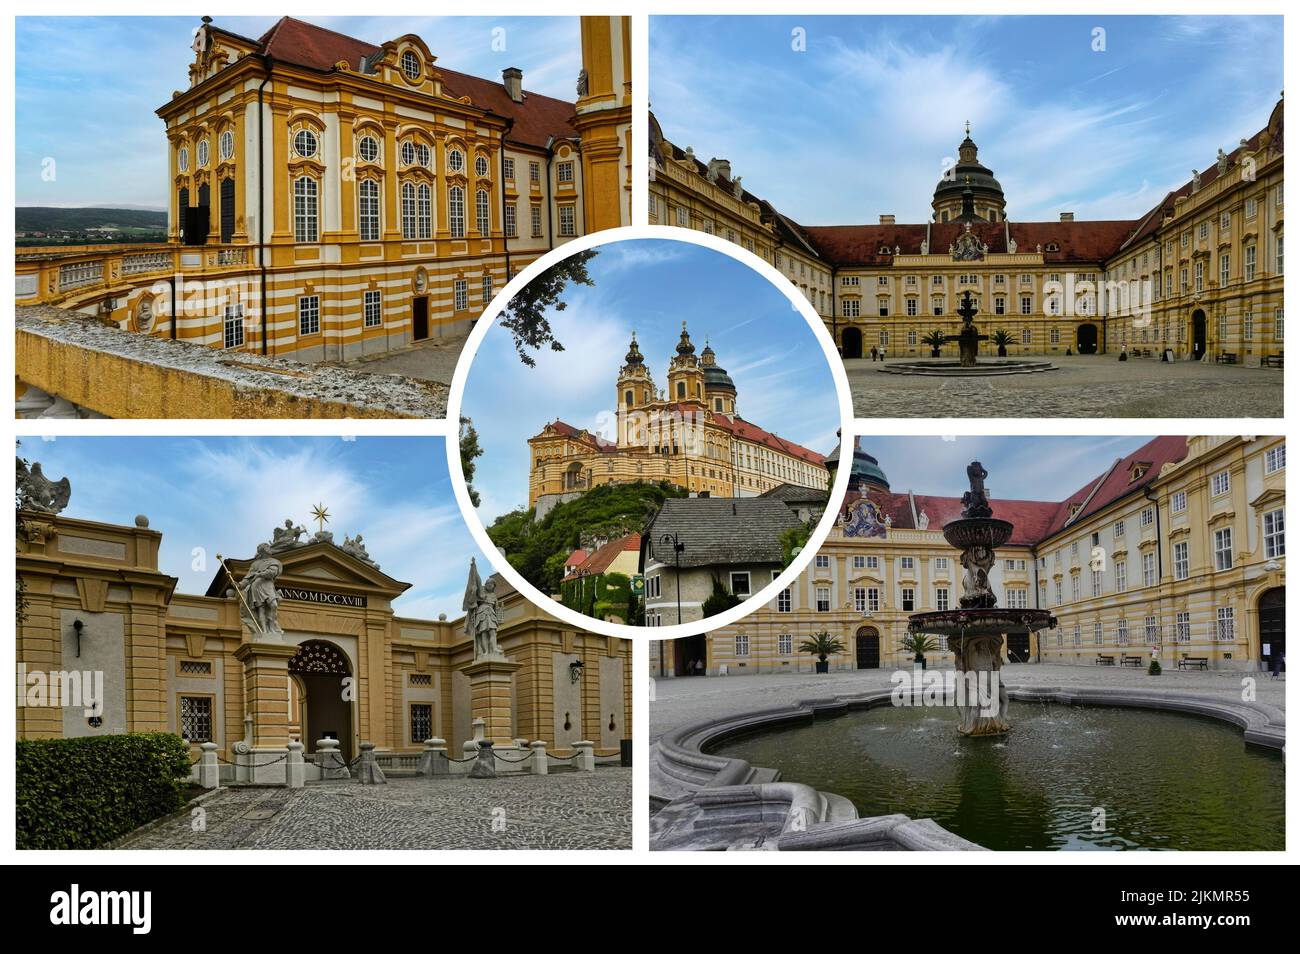 Stift Melk (Melk Abbey) is a Benedictine abbey in Melk, Austria. Monastery located on a rocky outcrop overlooking the Danube river Stock Photo